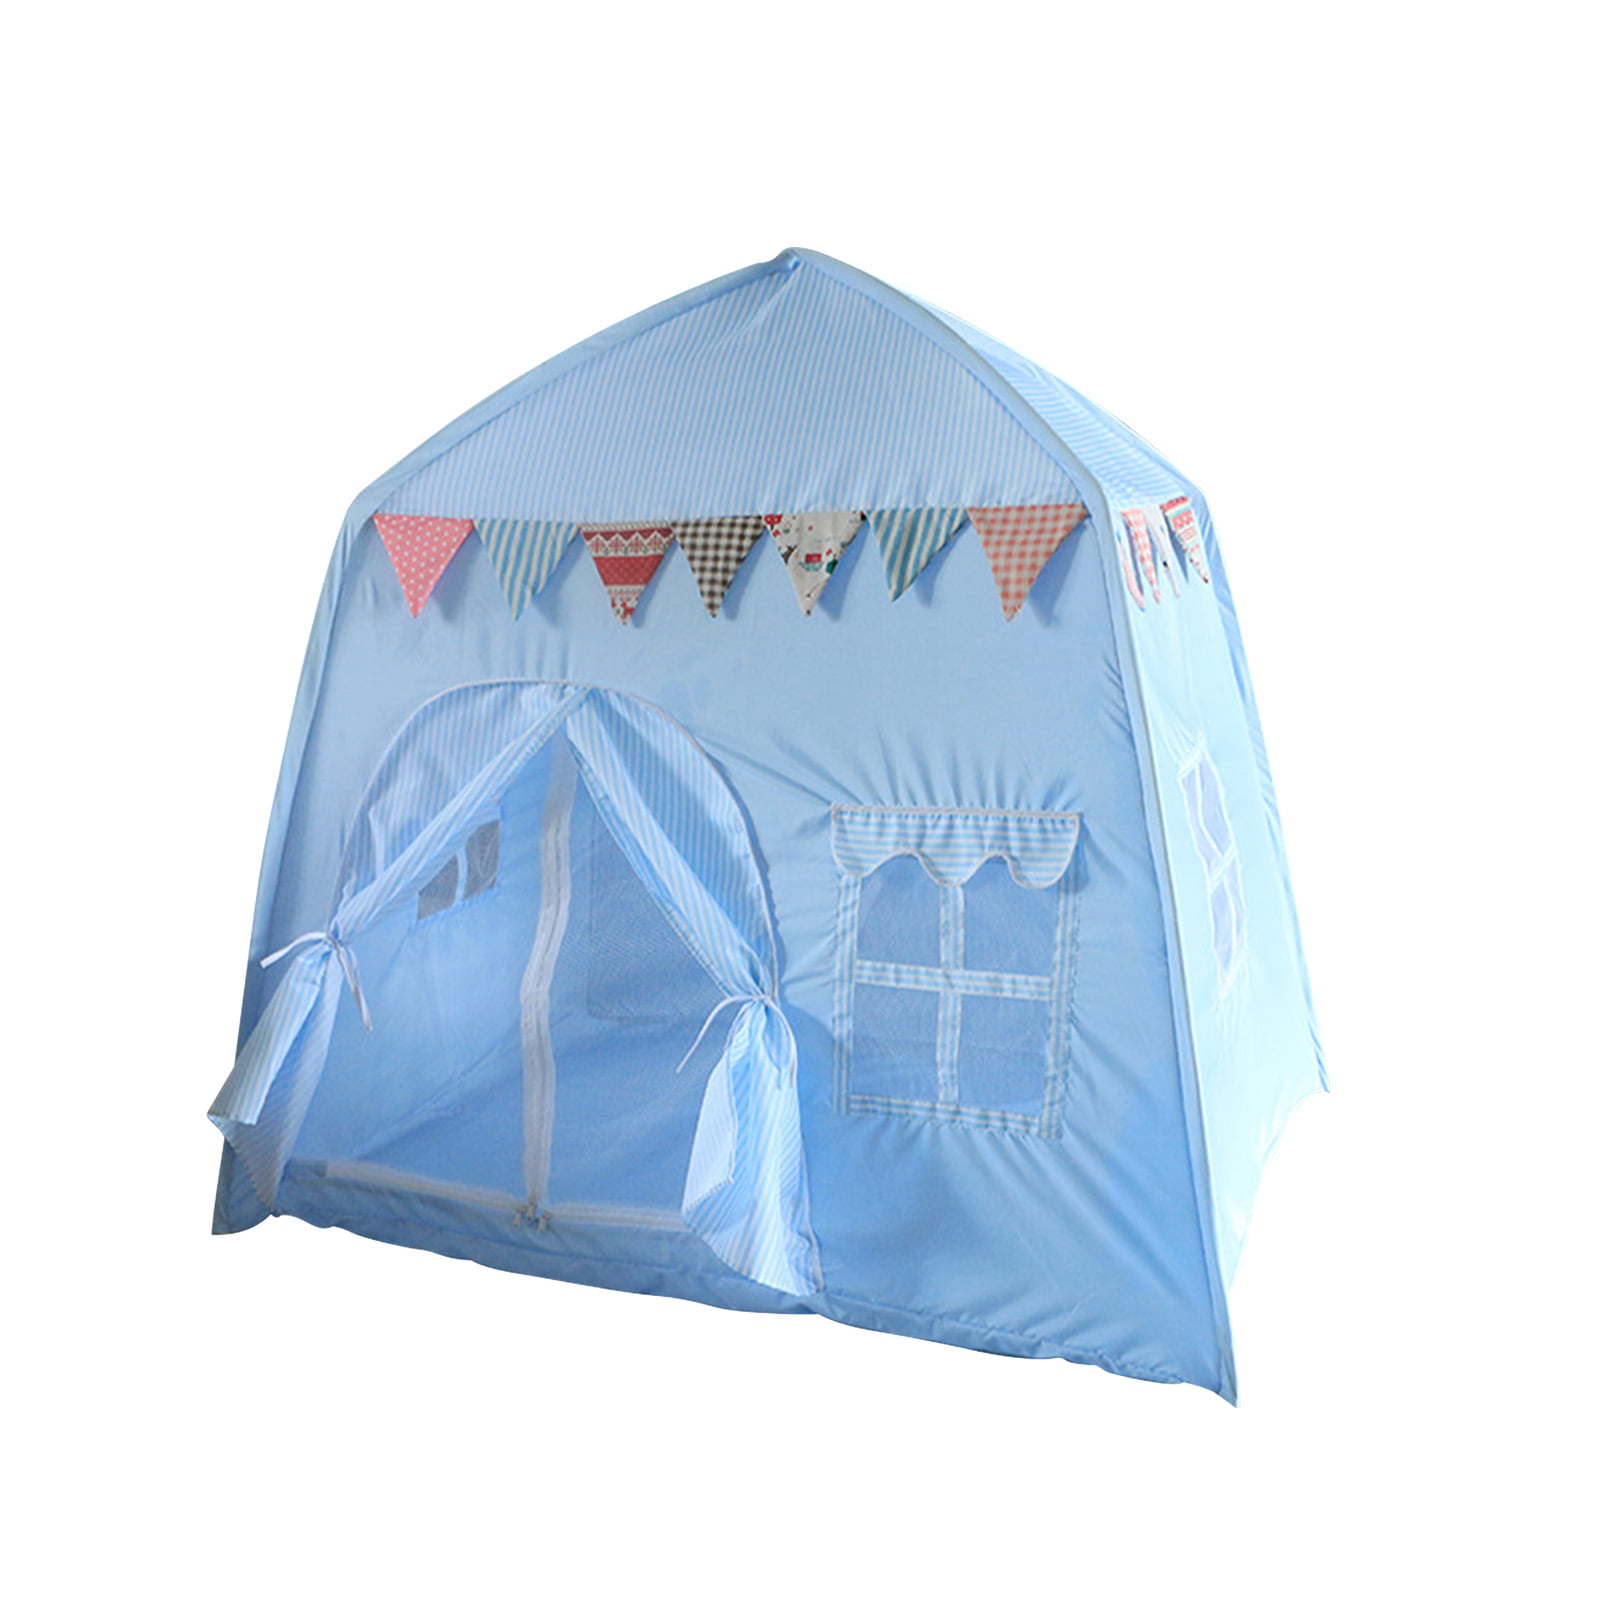 Princess Castle Tent，Outdoor and Indoor Playhouse Tent with Pennants for Kids，Kids Play Tent 